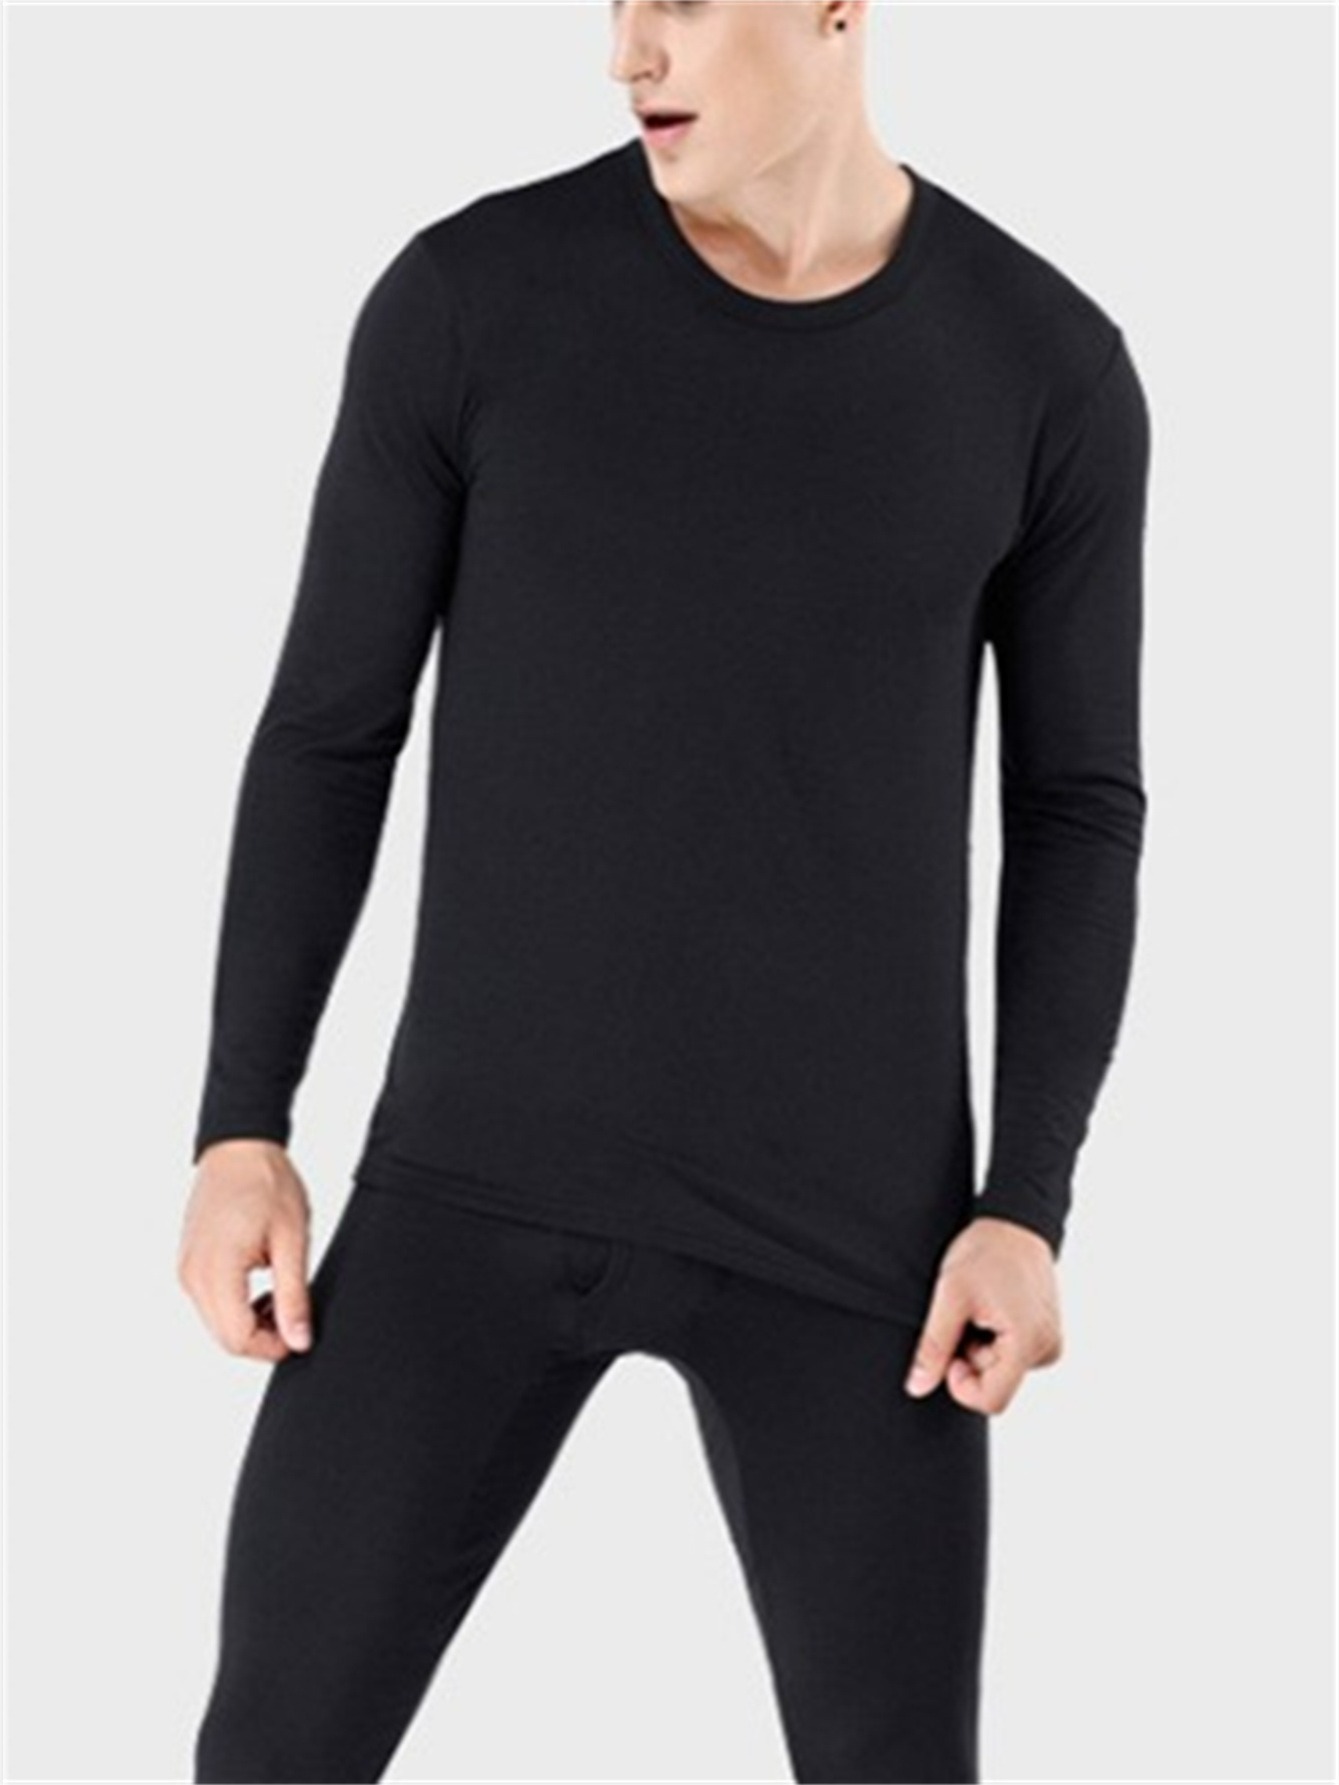 Winter Thermal Underwear Set Mens Set Long Suit With Warm Top And Pants For  Keep Warm Johns 221105 From Nian02, $16.5